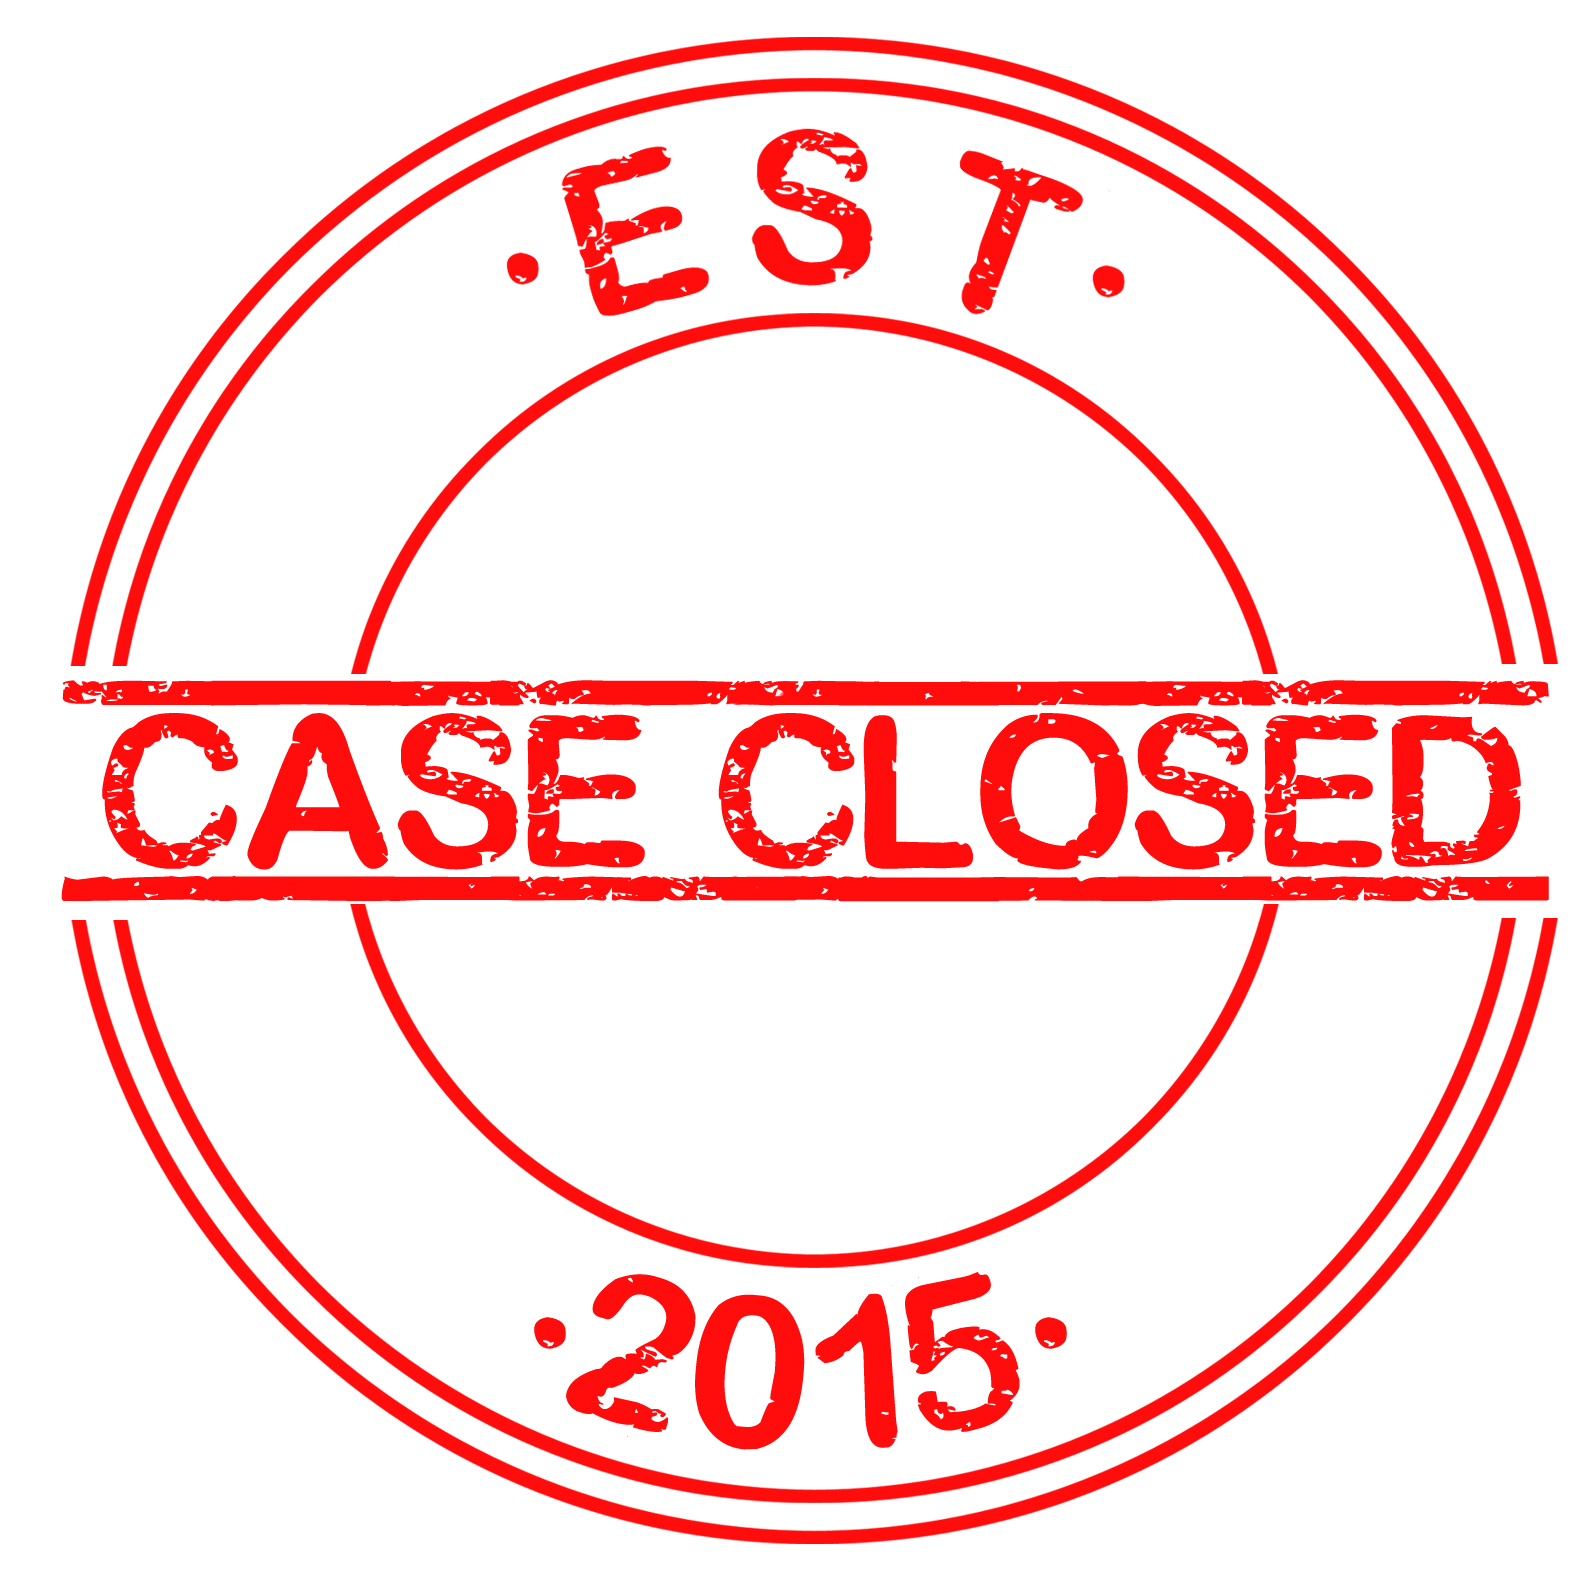 Case Closed Stamp PNG Free Download